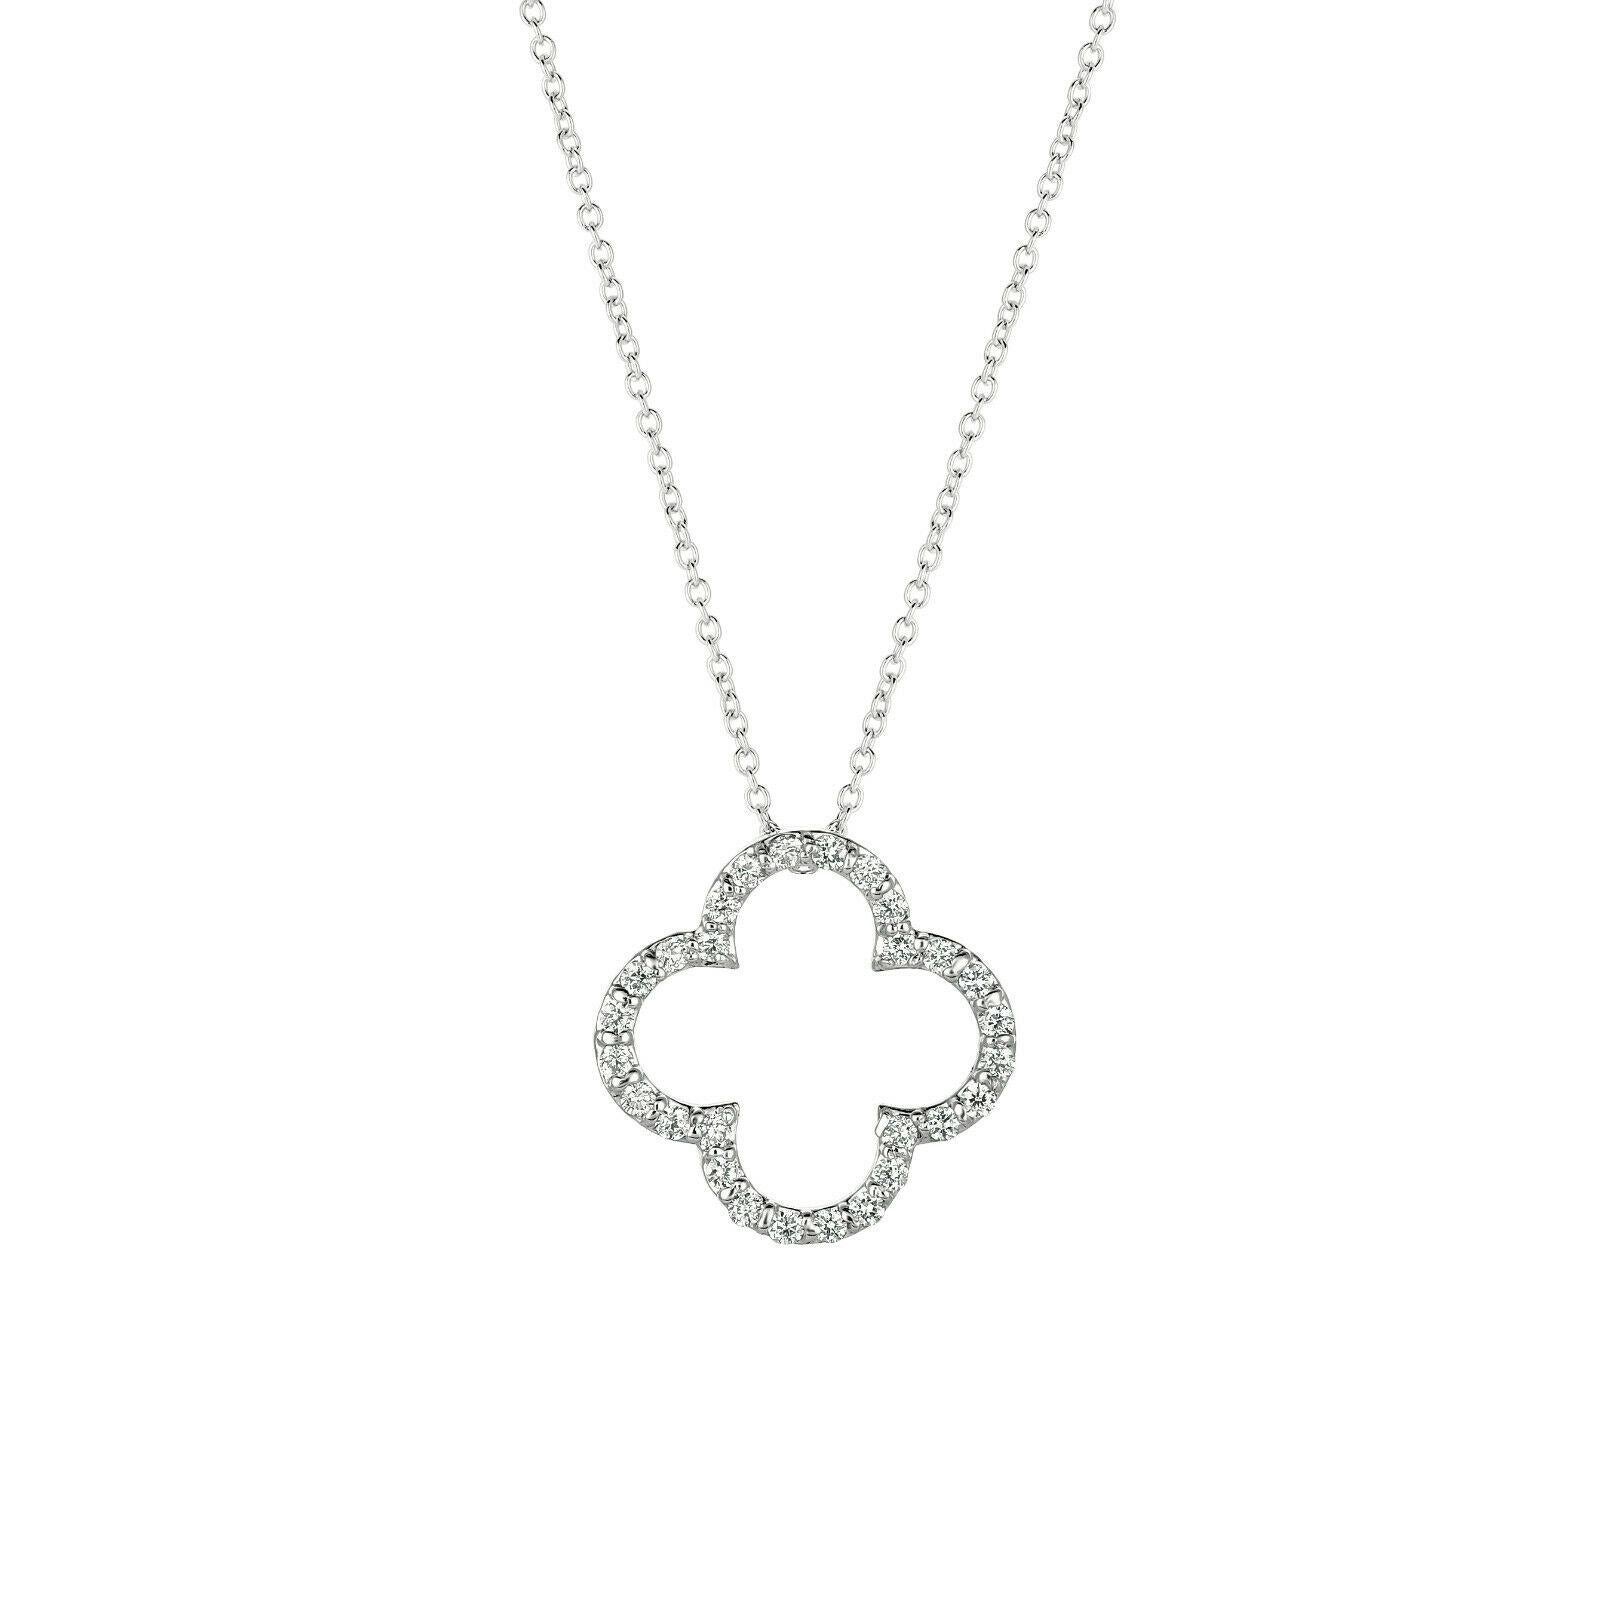 Contemporary 0.25 Carat Natural Diamond Clover Pendant Necklace 14K White Gold Chain For Sale